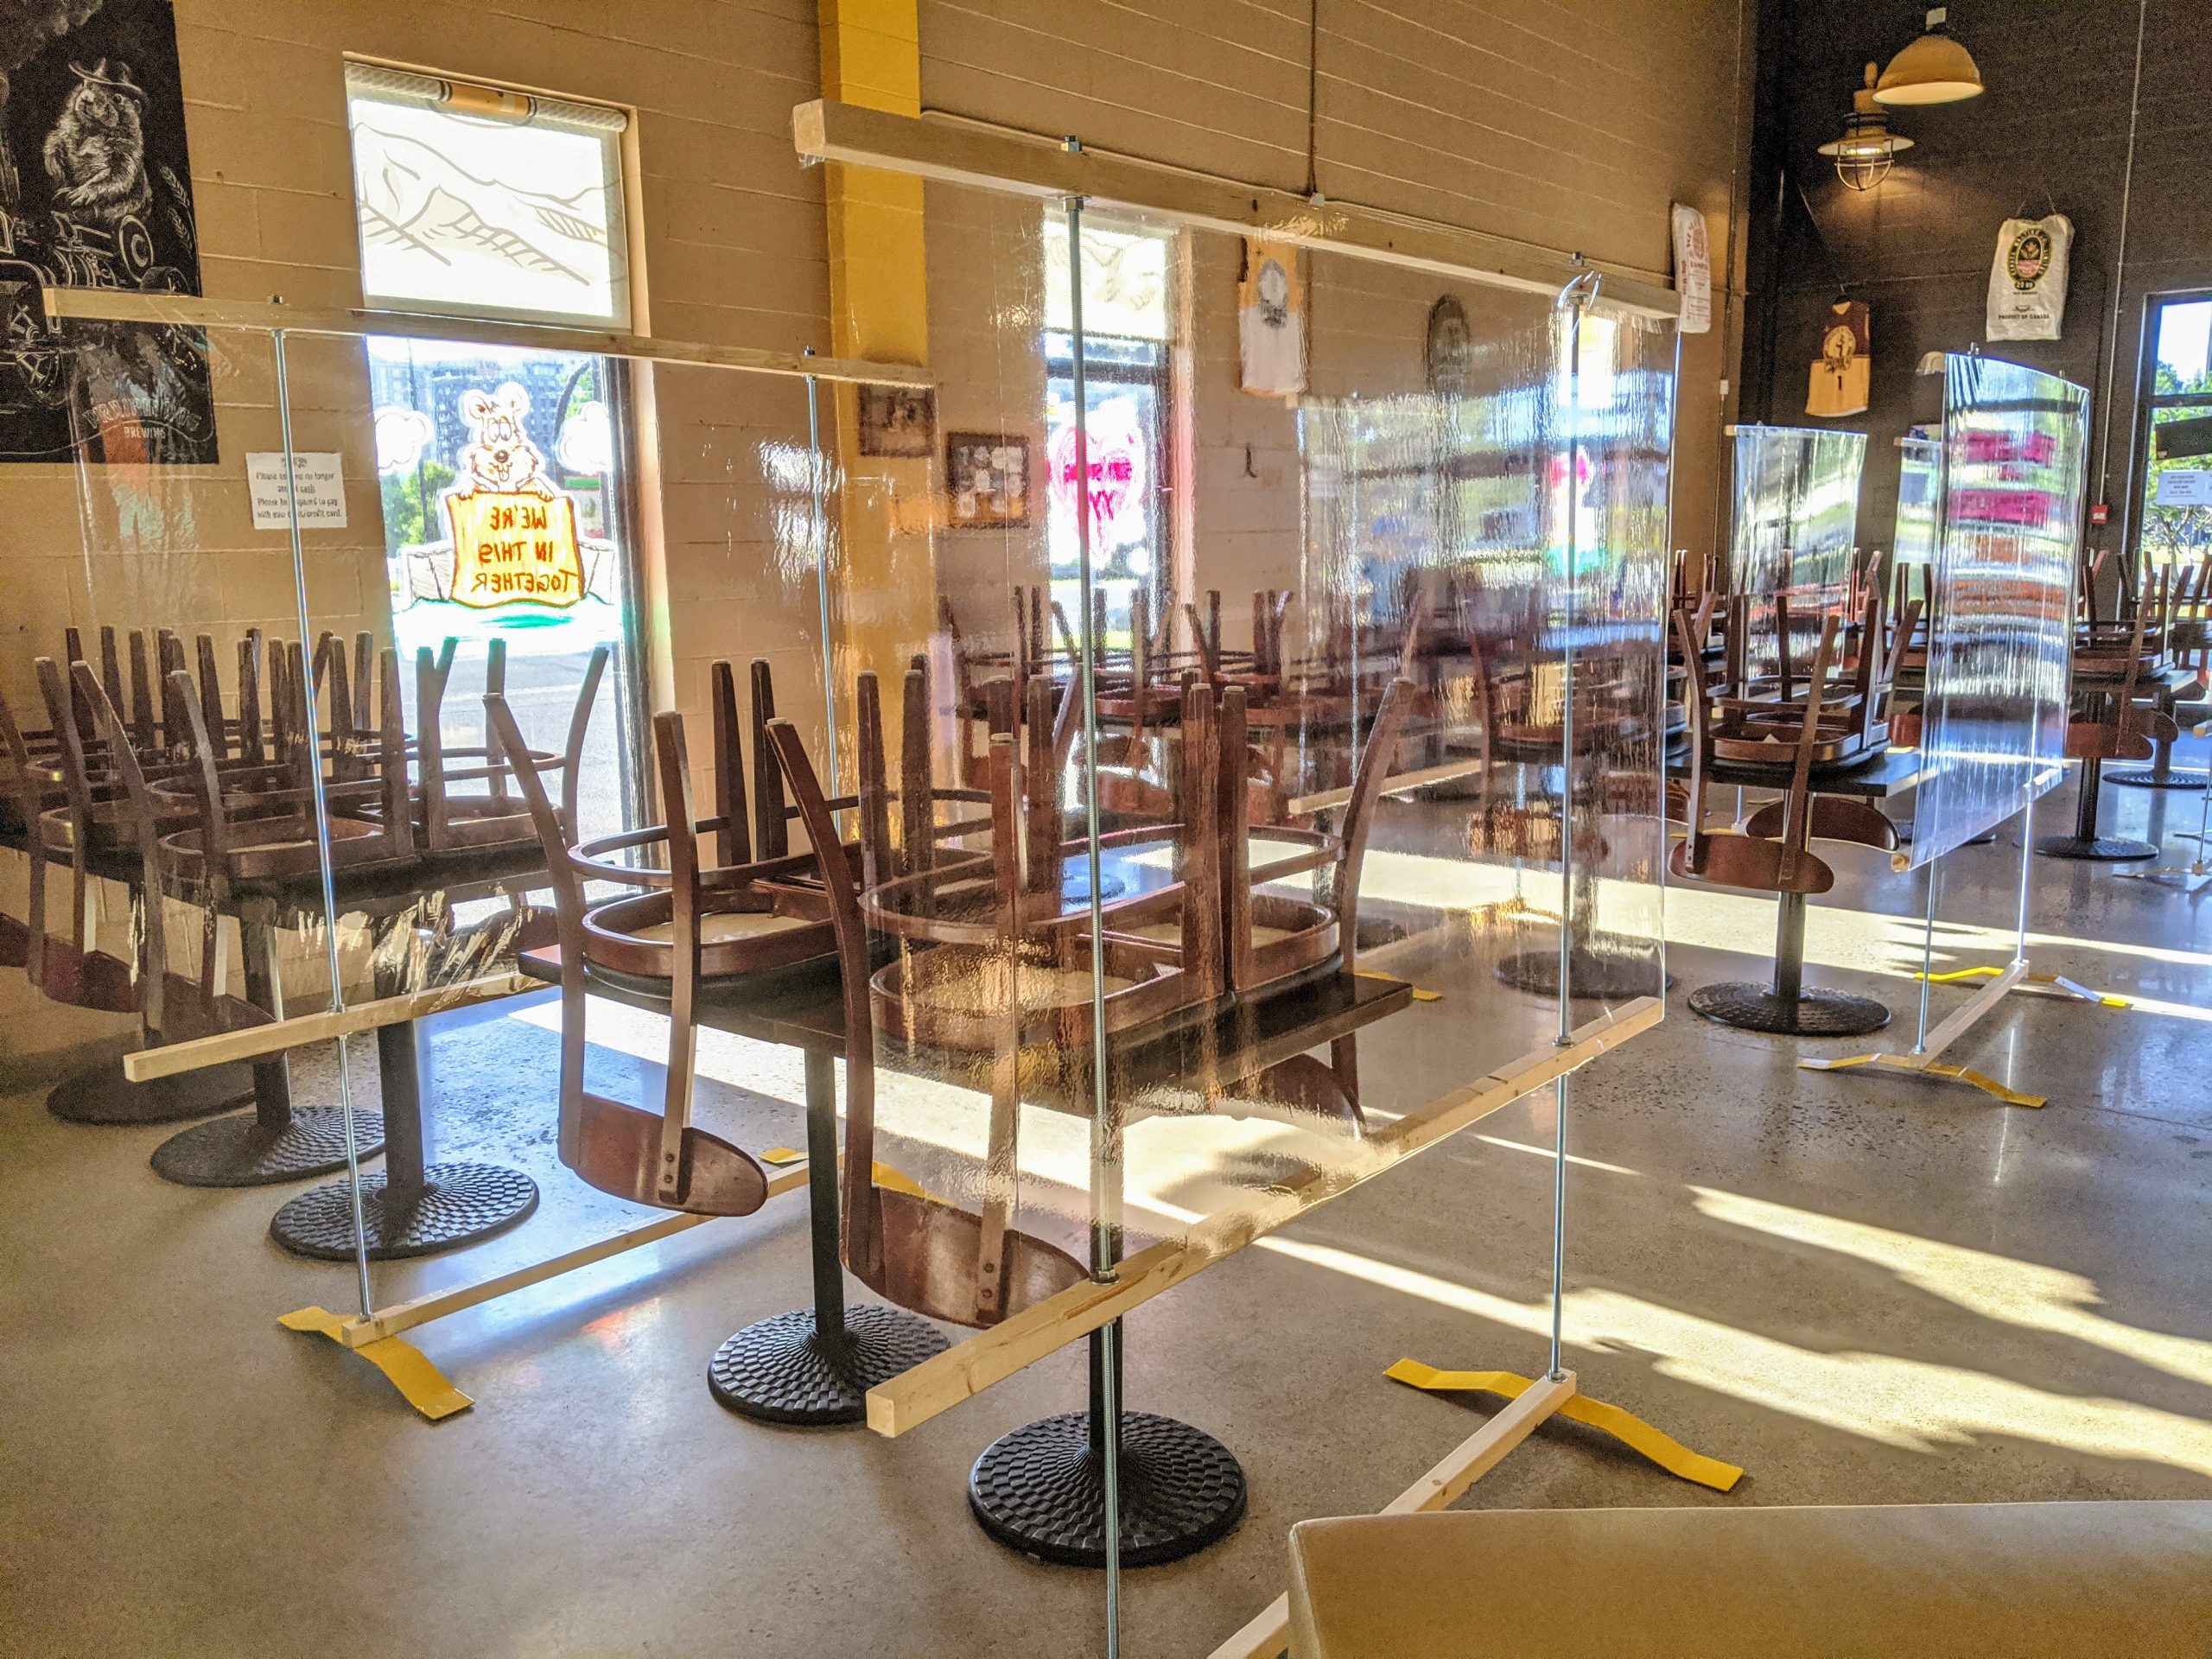 Low tables with mobile barrier solution in Prairie Dog Brewing dining room allow customers to reconnect with an extra margin of safety against SARS-CoV-2.